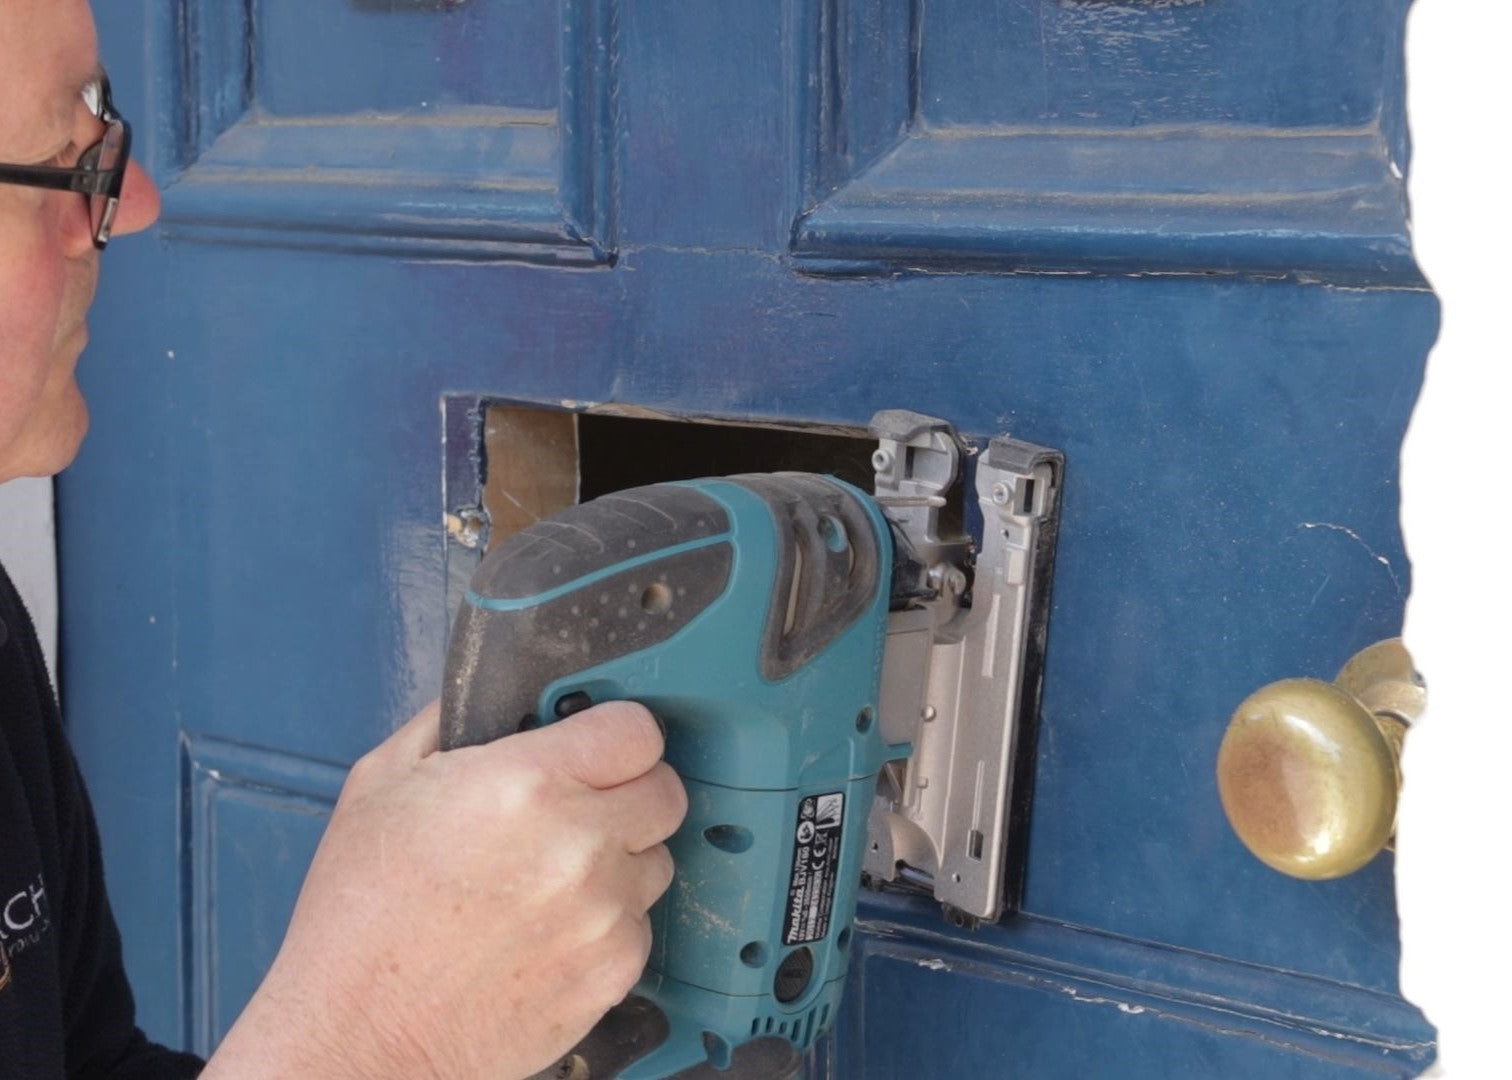 Person using a band saw to cut a hole for a letterbox in a blue wooden door.